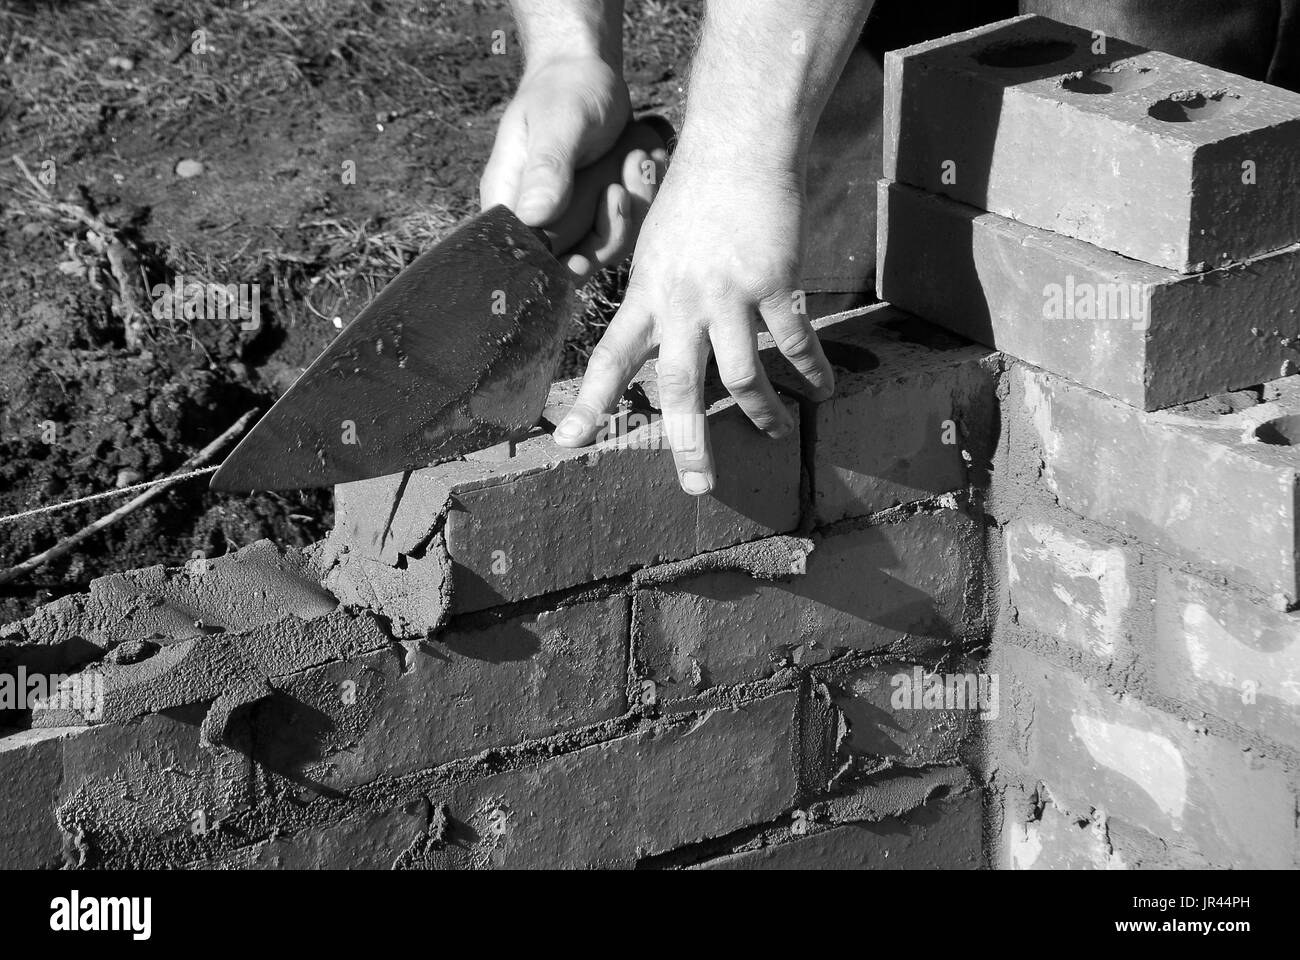 Closeup of bricklayer building a house extension. Photo shows man holding trowel while laying bricks. Stock Photo